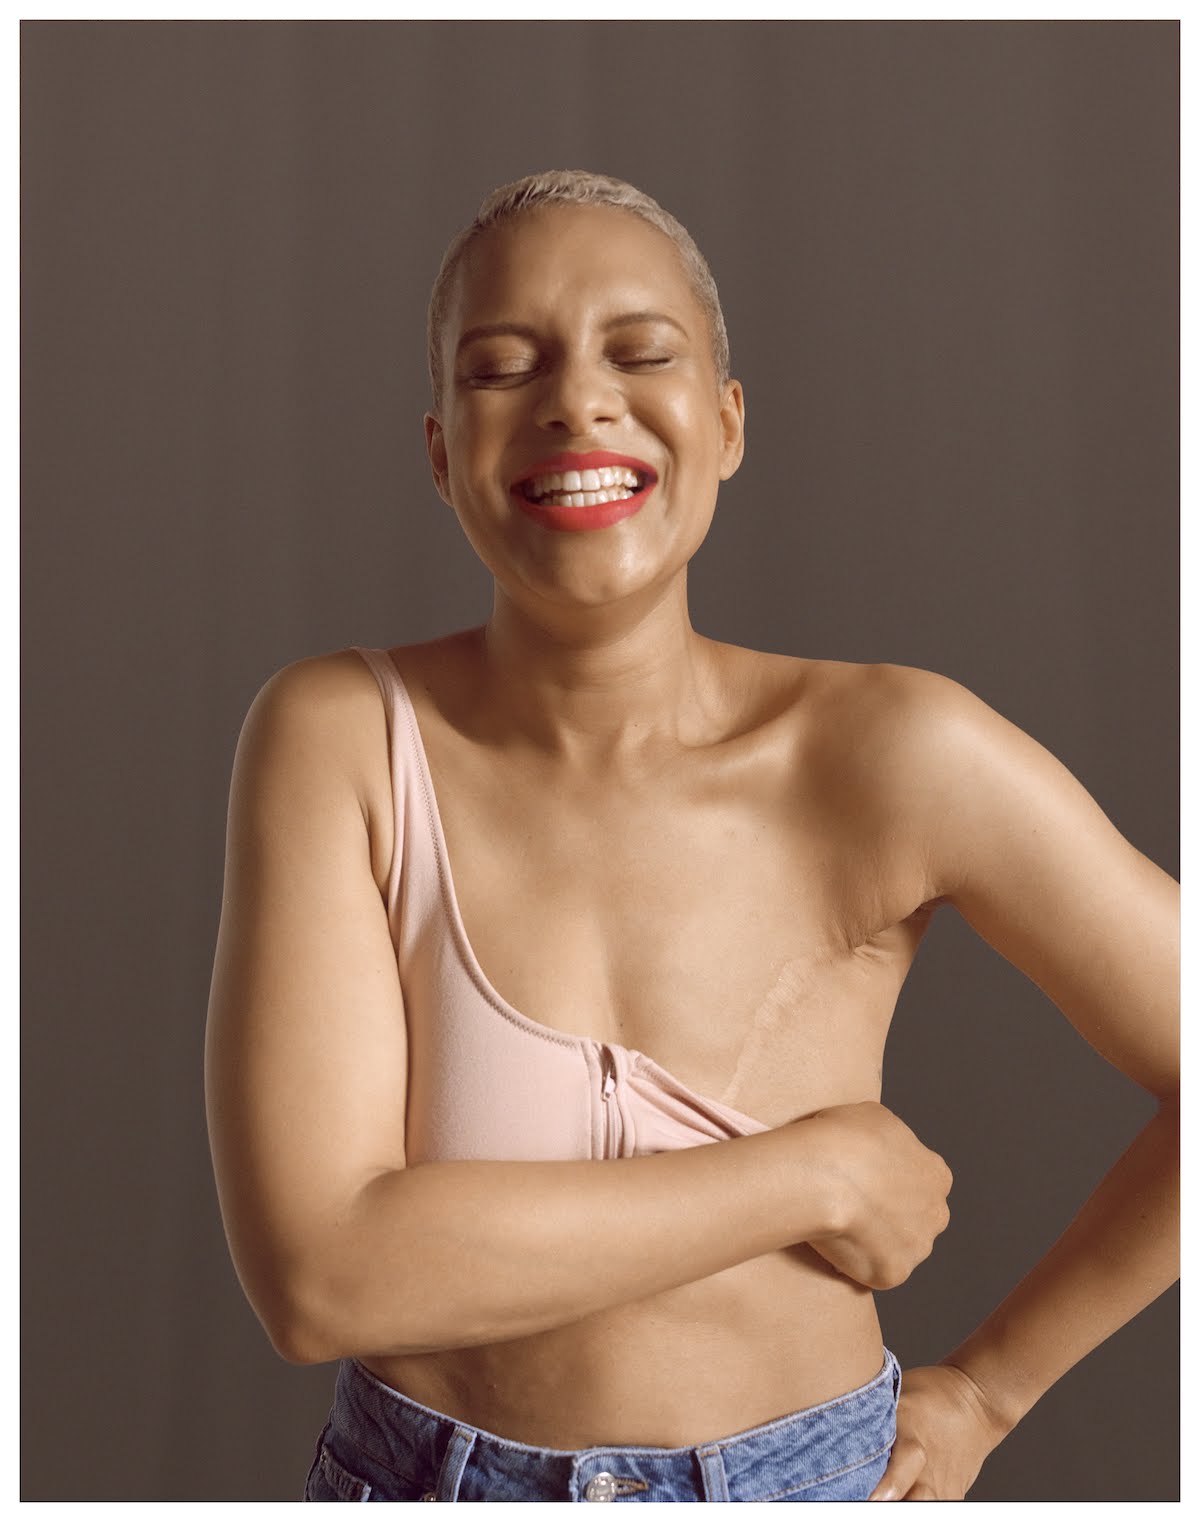 Primark launches new collection for Breast Cancer Awareness